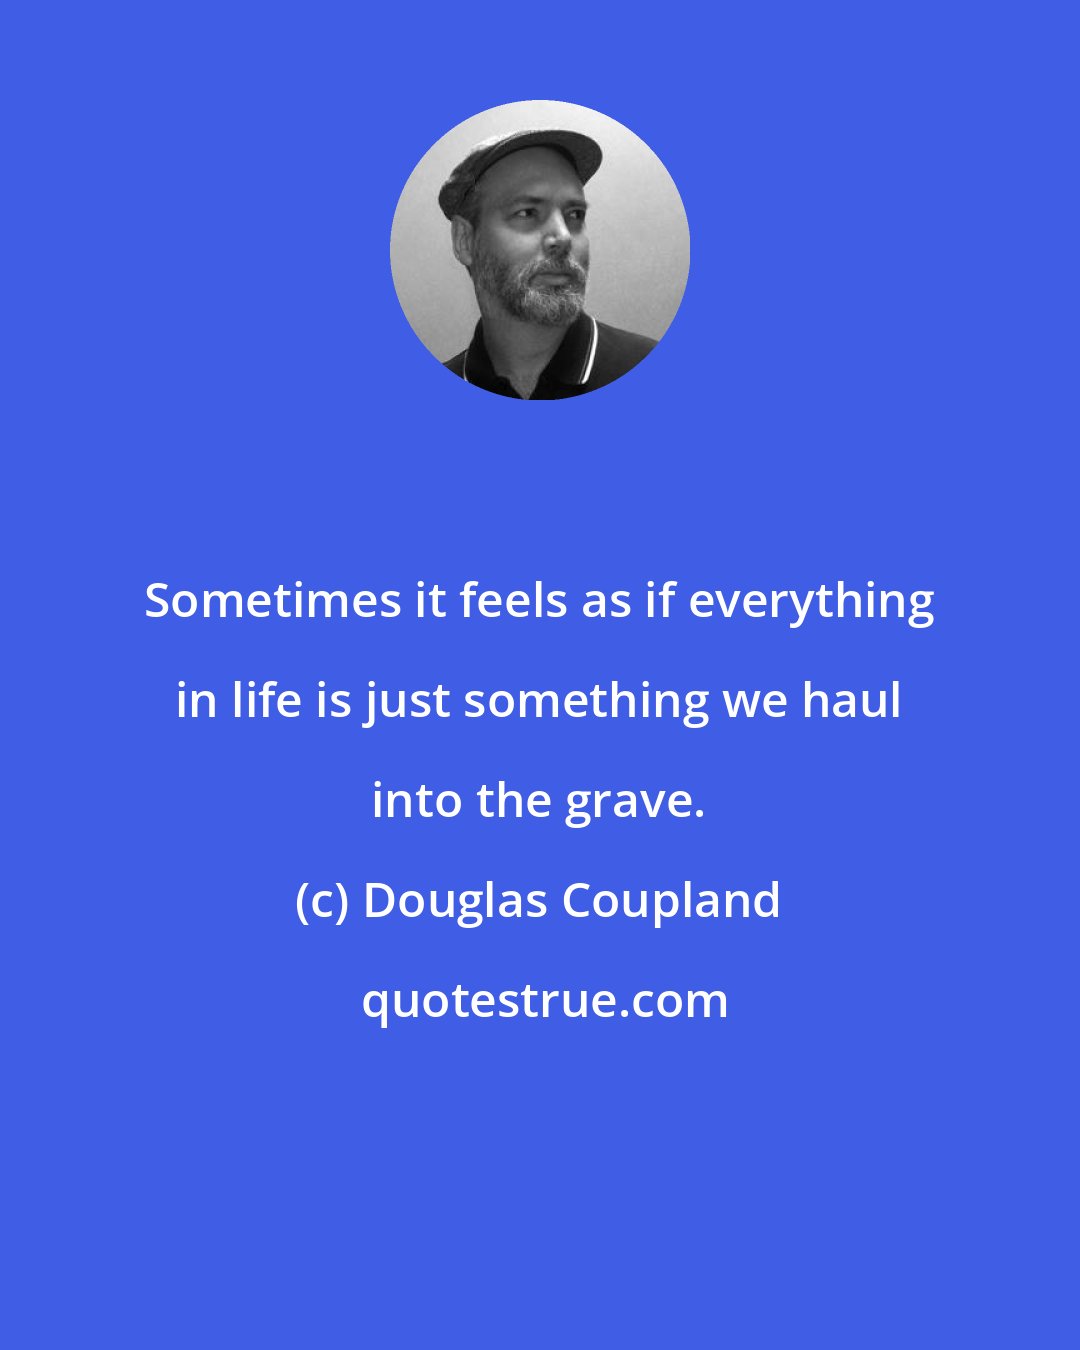 Douglas Coupland: Sometimes it feels as if everything in life is just something we haul into the grave.